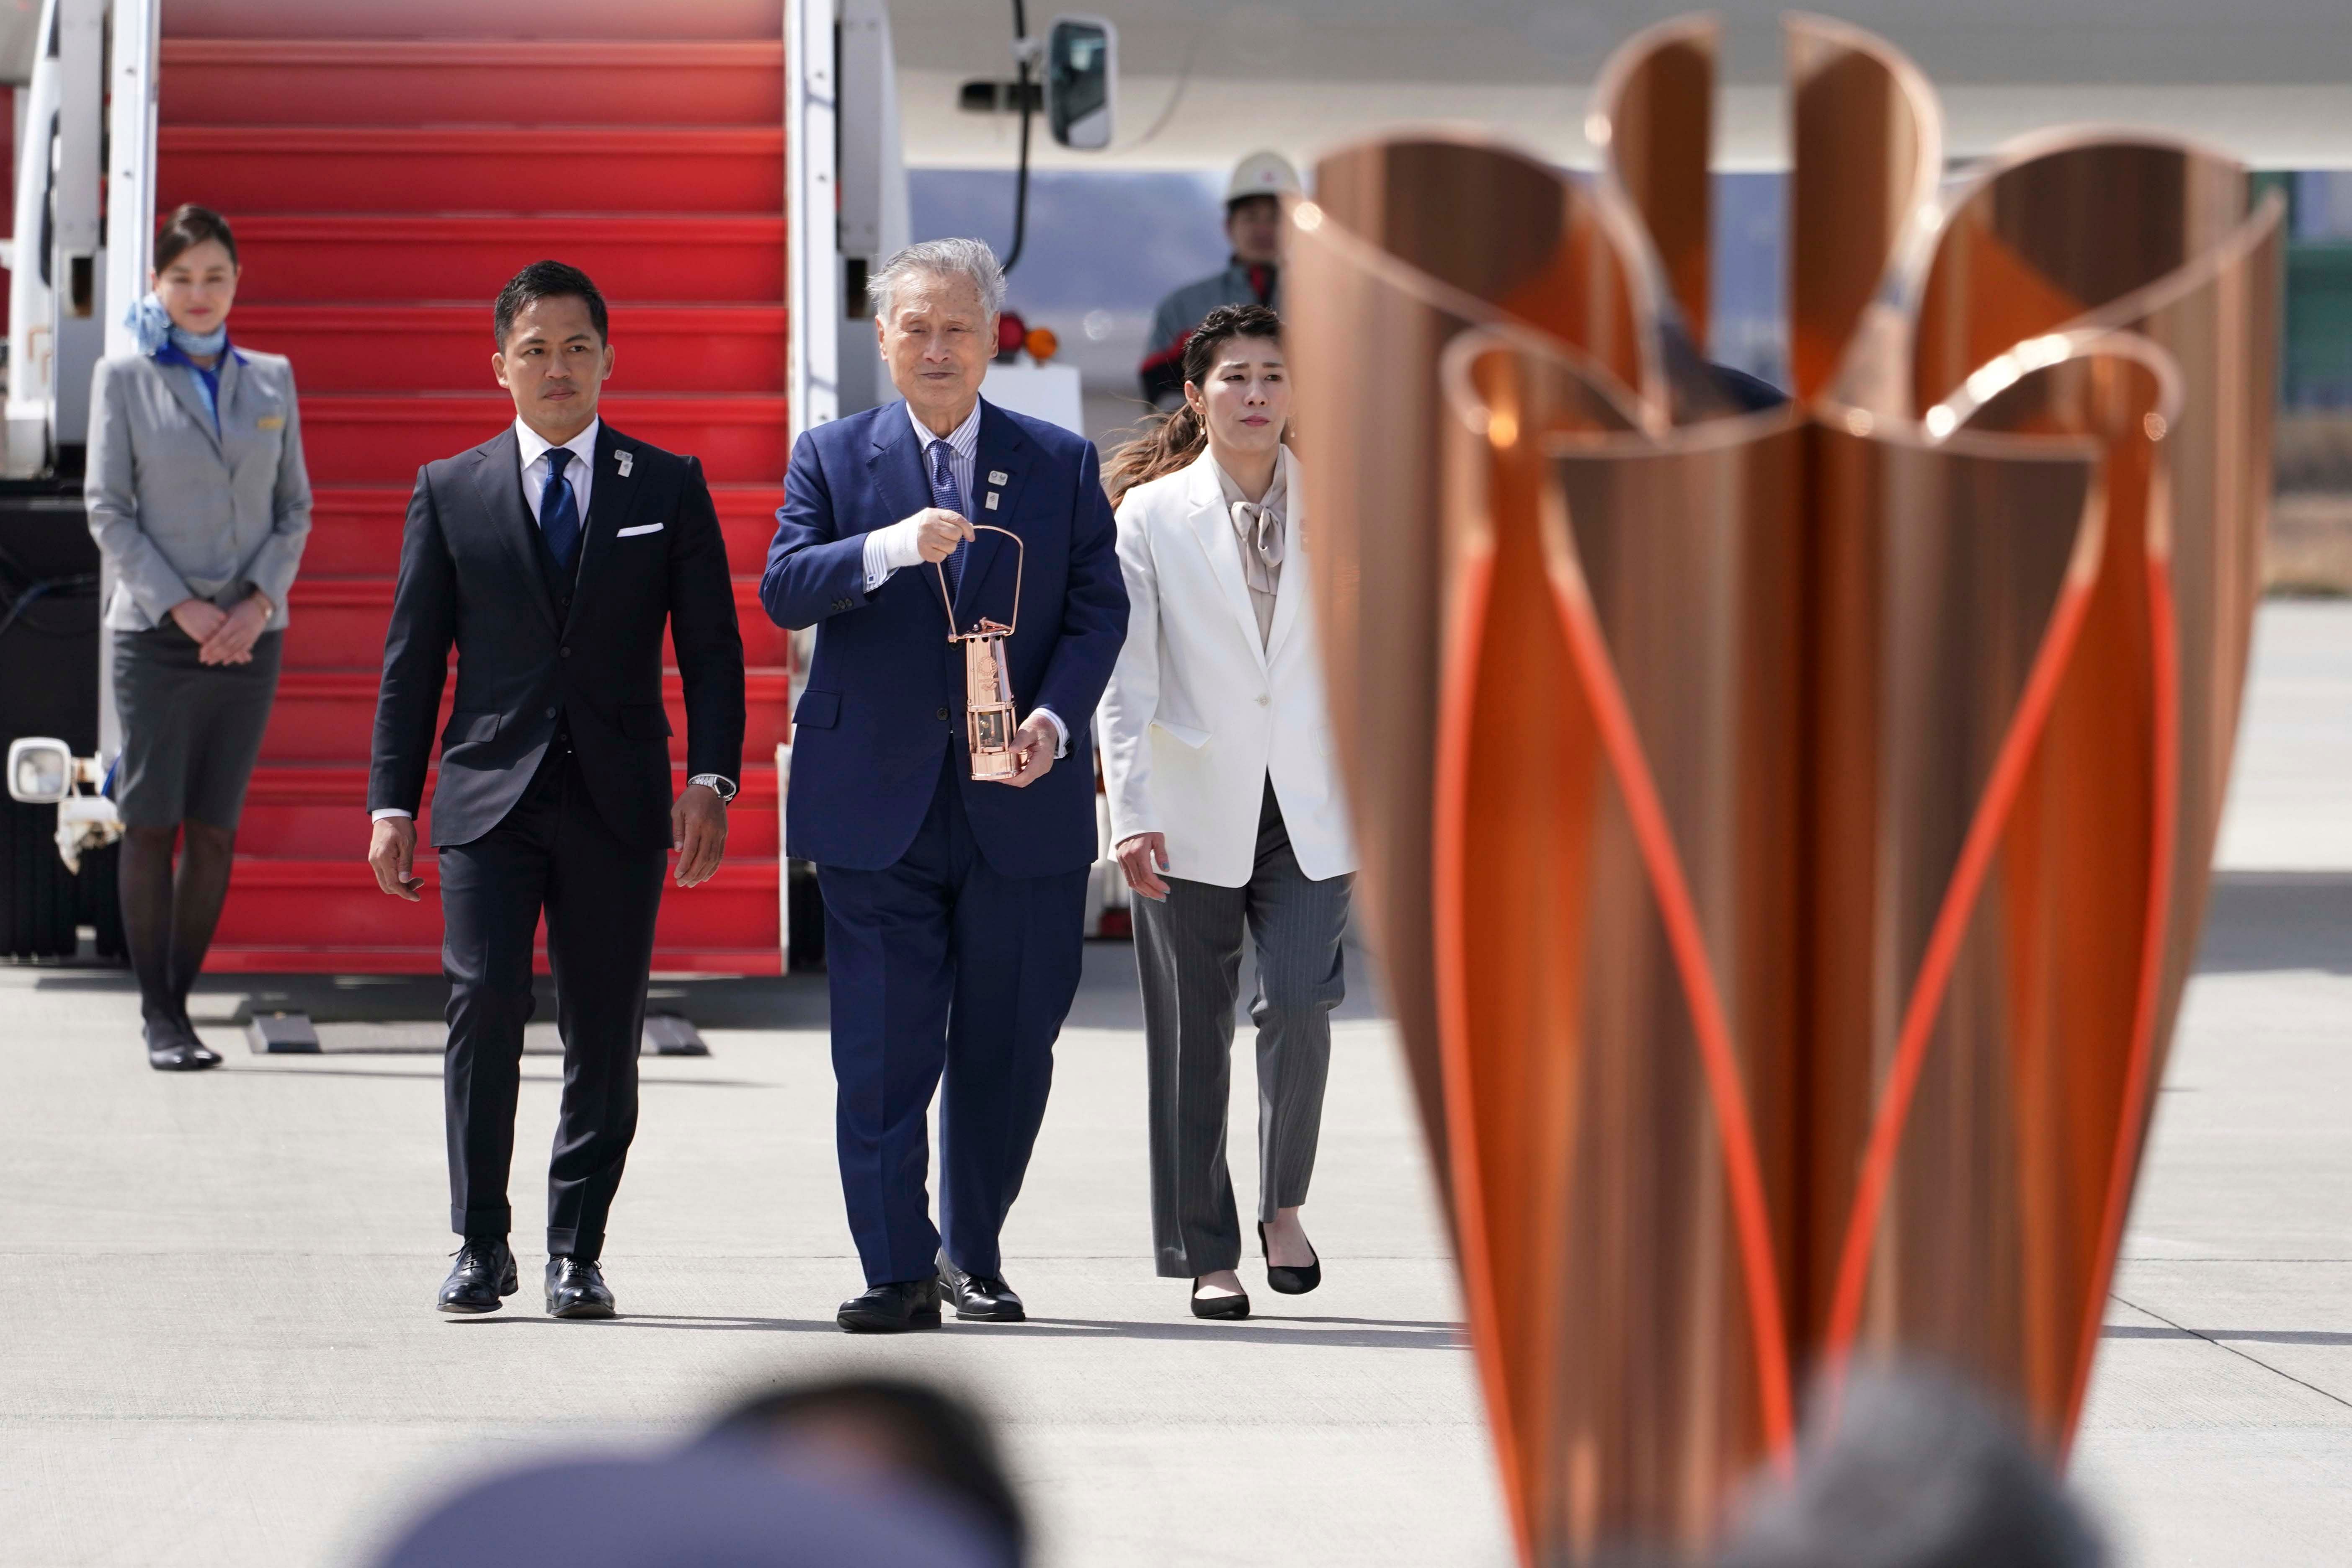 Tokyo 2020 Olympics chief Yoshiro Mori, center, followed by three-time Olympic gold medalists Tadahiro Nomura and Saori Yoshida, right, carries the Olympic flame during the Flame Arrival Ceremony at Japan Air Self-Defense Force Matsushima Base in Higashimatsushima in Miyagi Prefecture, north of Tokyo. (Credit: AFP)